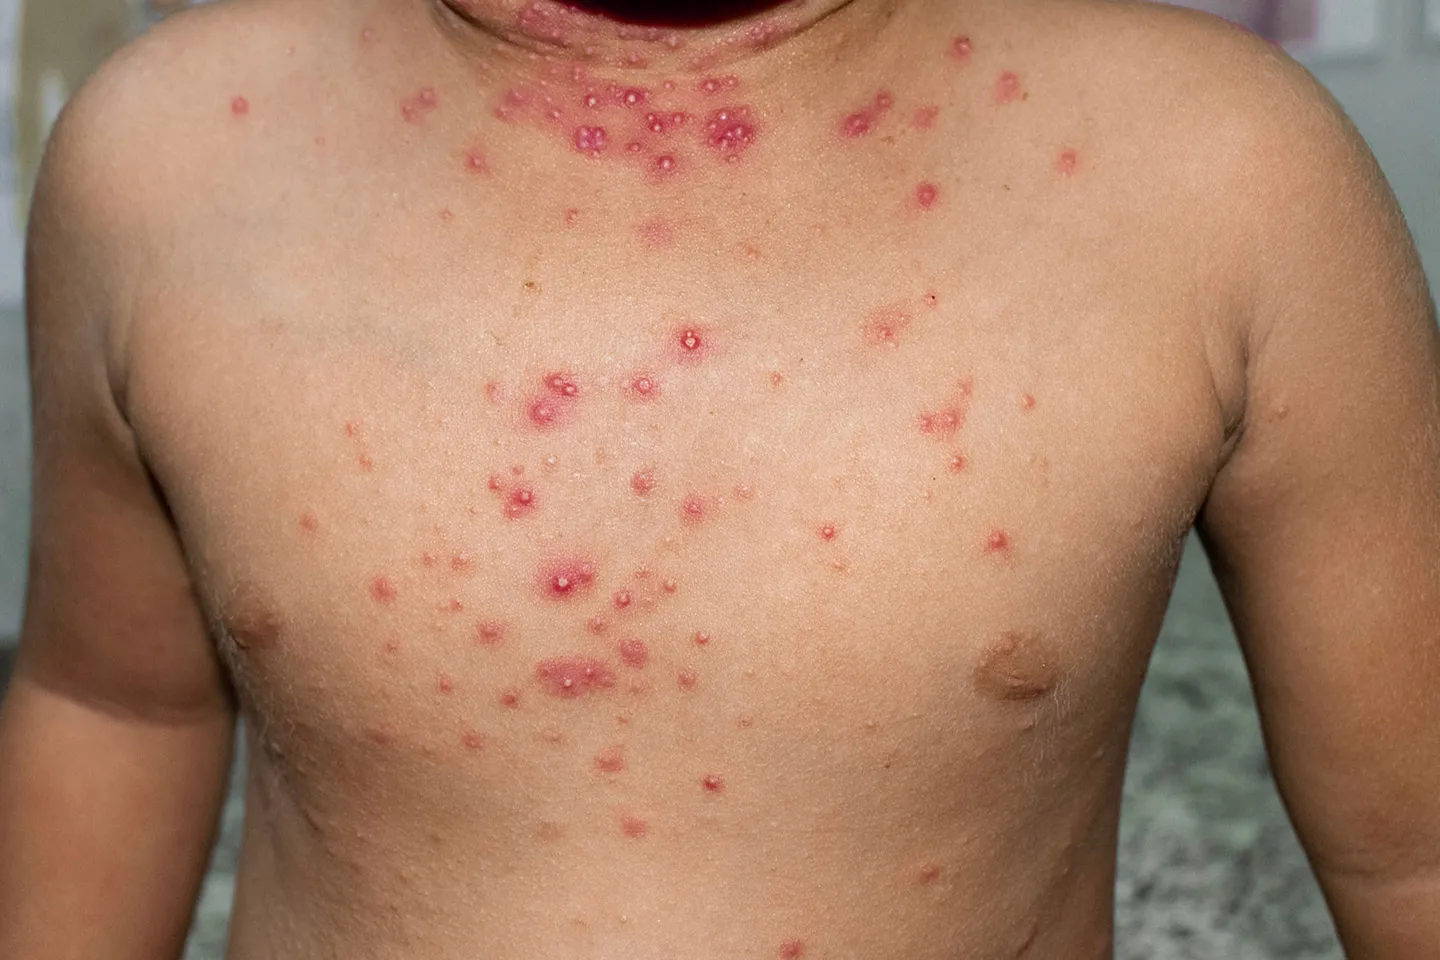 Skin infection caoused by virus in molluscum contagiosum